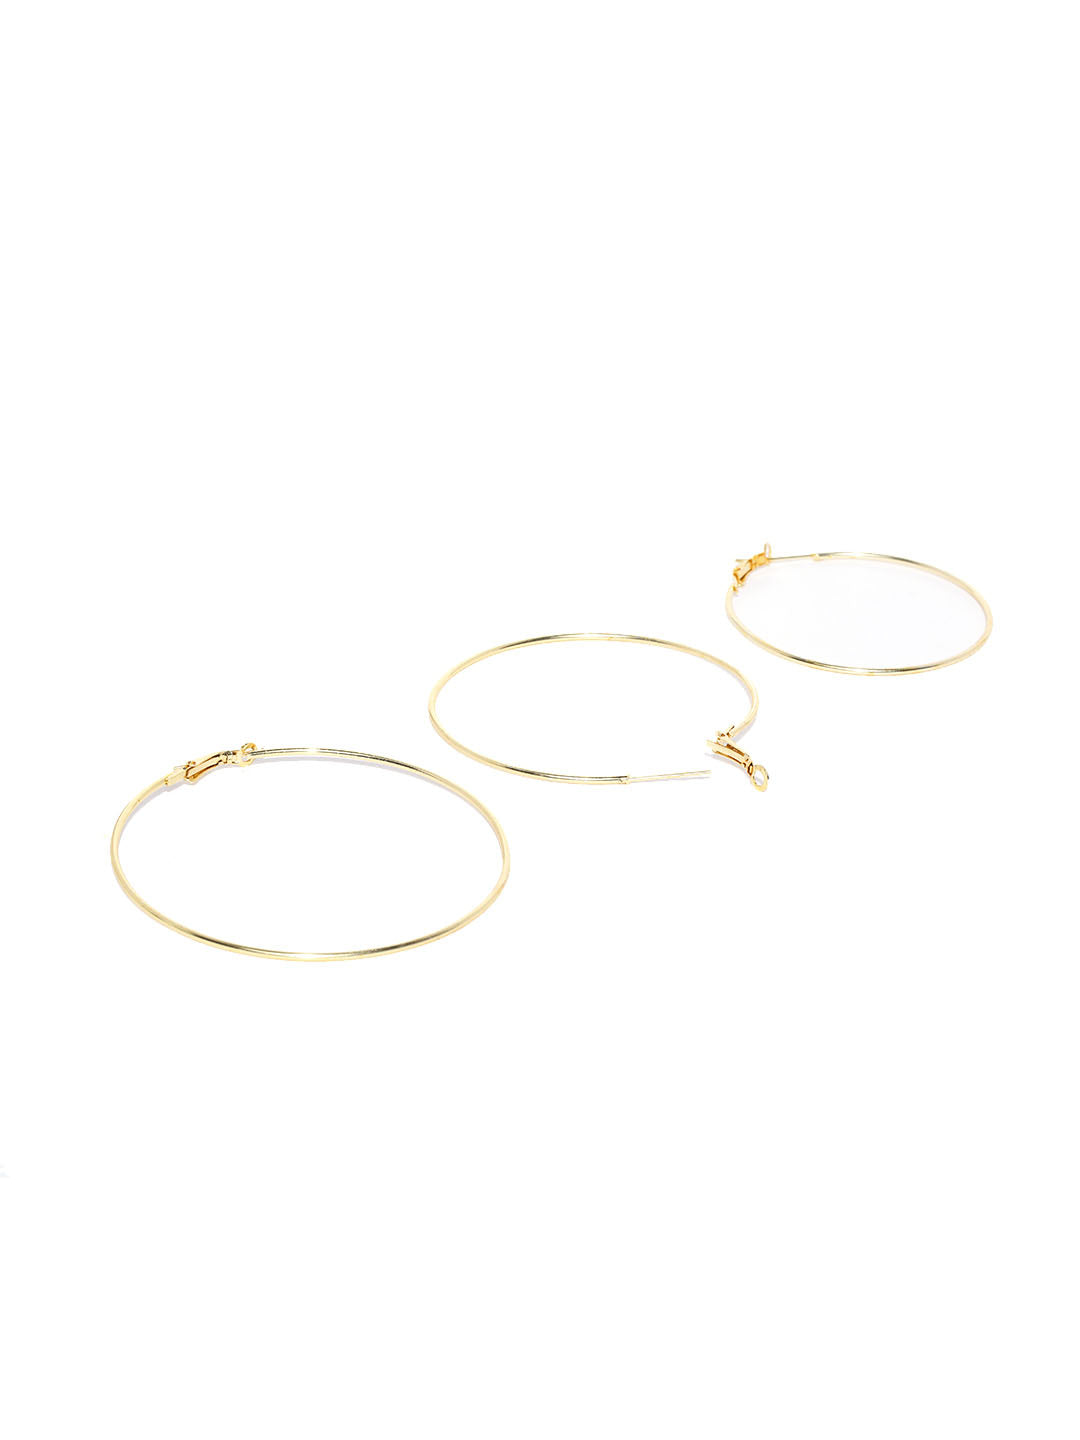 Designer Gold Plated Combo Of Three Pairs Hoop Earrings For Women And Girls